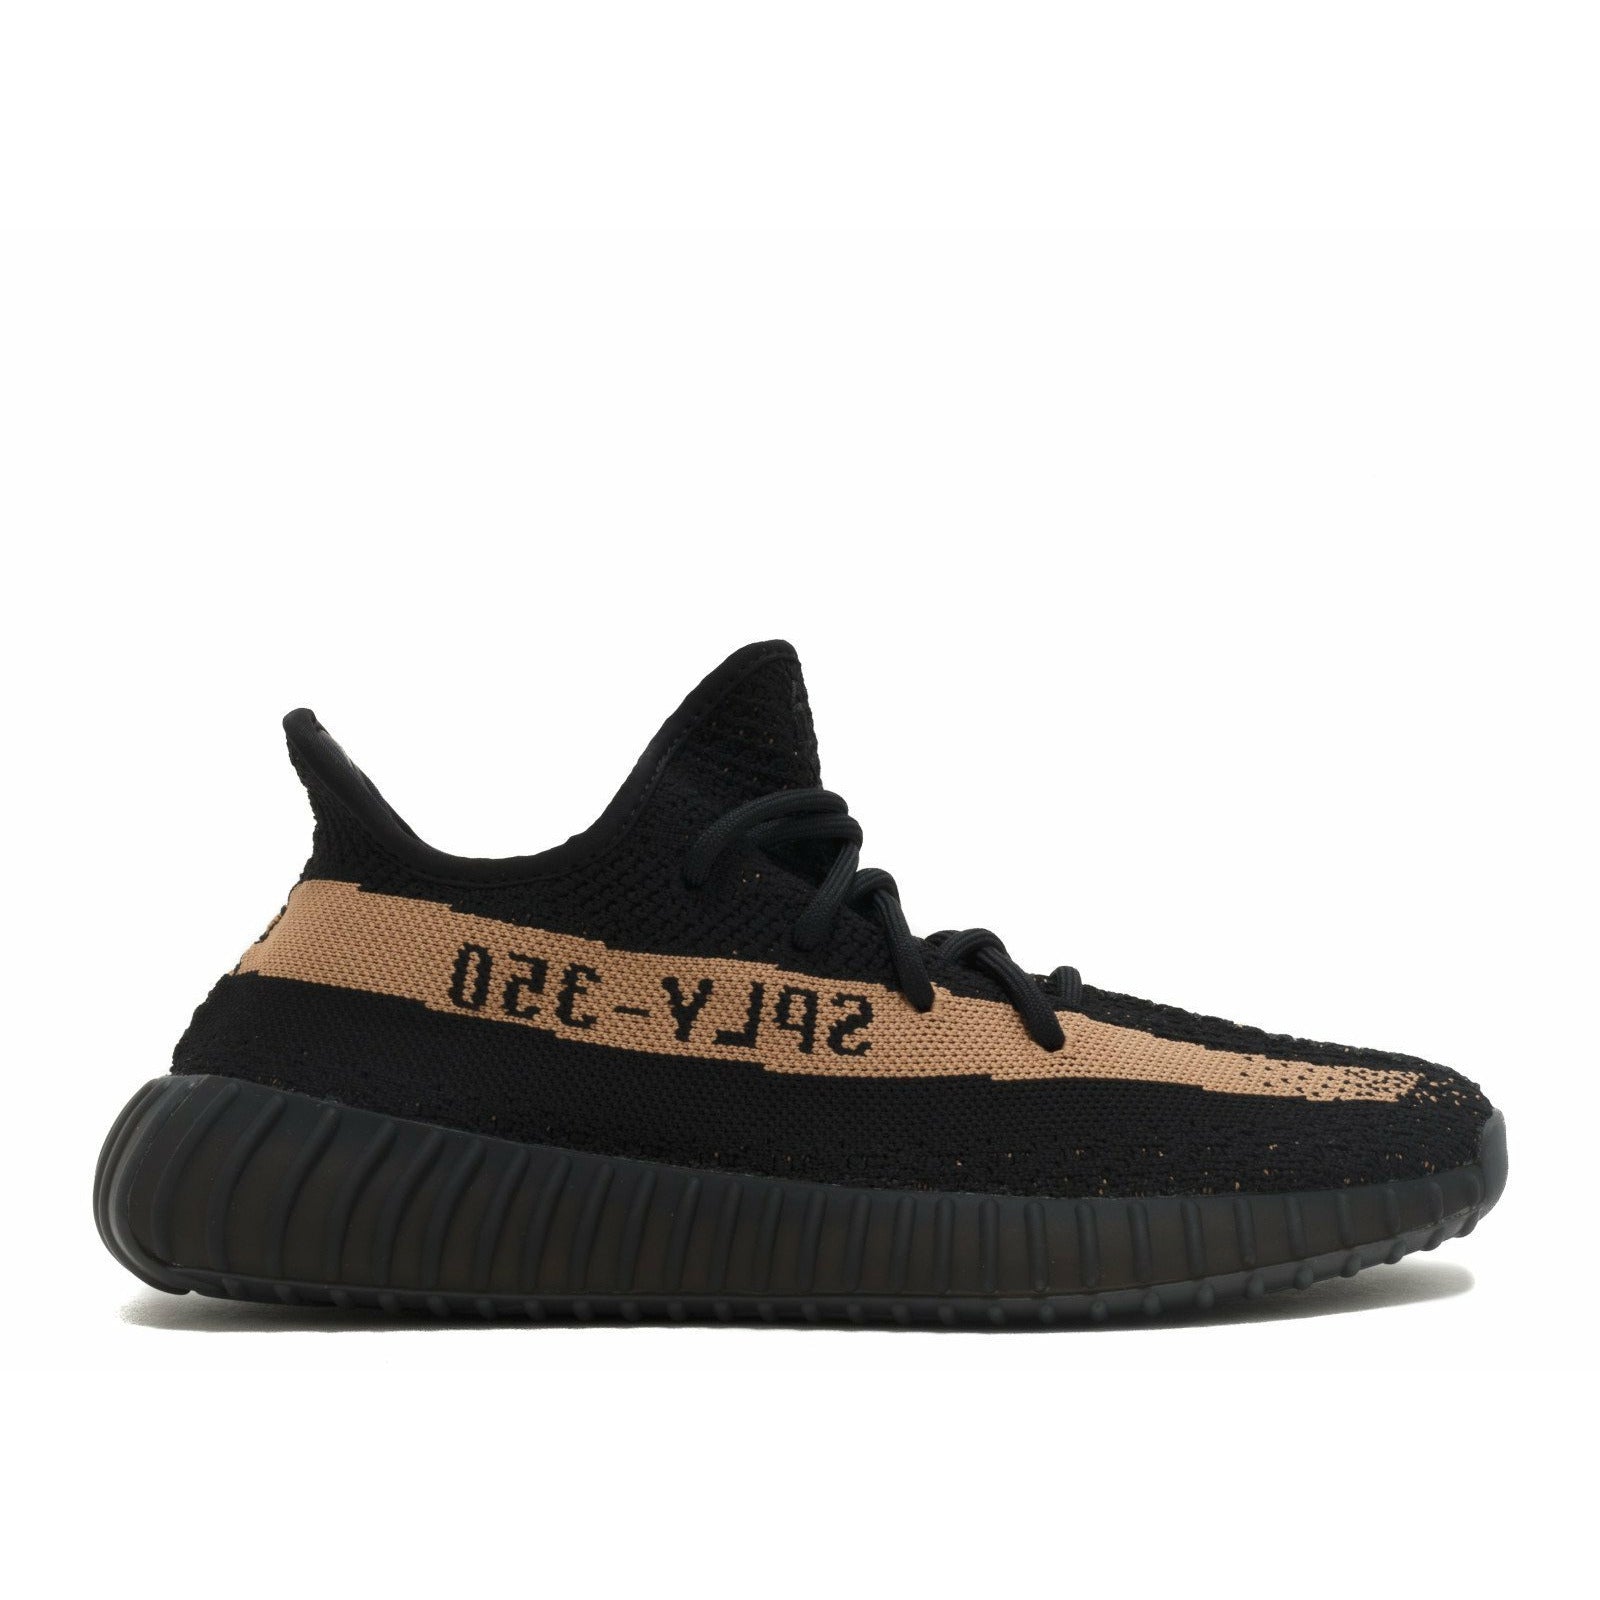 Adidas-Yeezy Boost 350 V2 "Copper Stripe"-Yeezy Boost 350 V2 "Copper" Sneakers
Product code: BY1605 Colour: CORE BLACK/COPPER/CORE BLACK Year of release: 2016 | MrSneaker is Europe's number 1 exclusive sneaker store.-mrsneaker